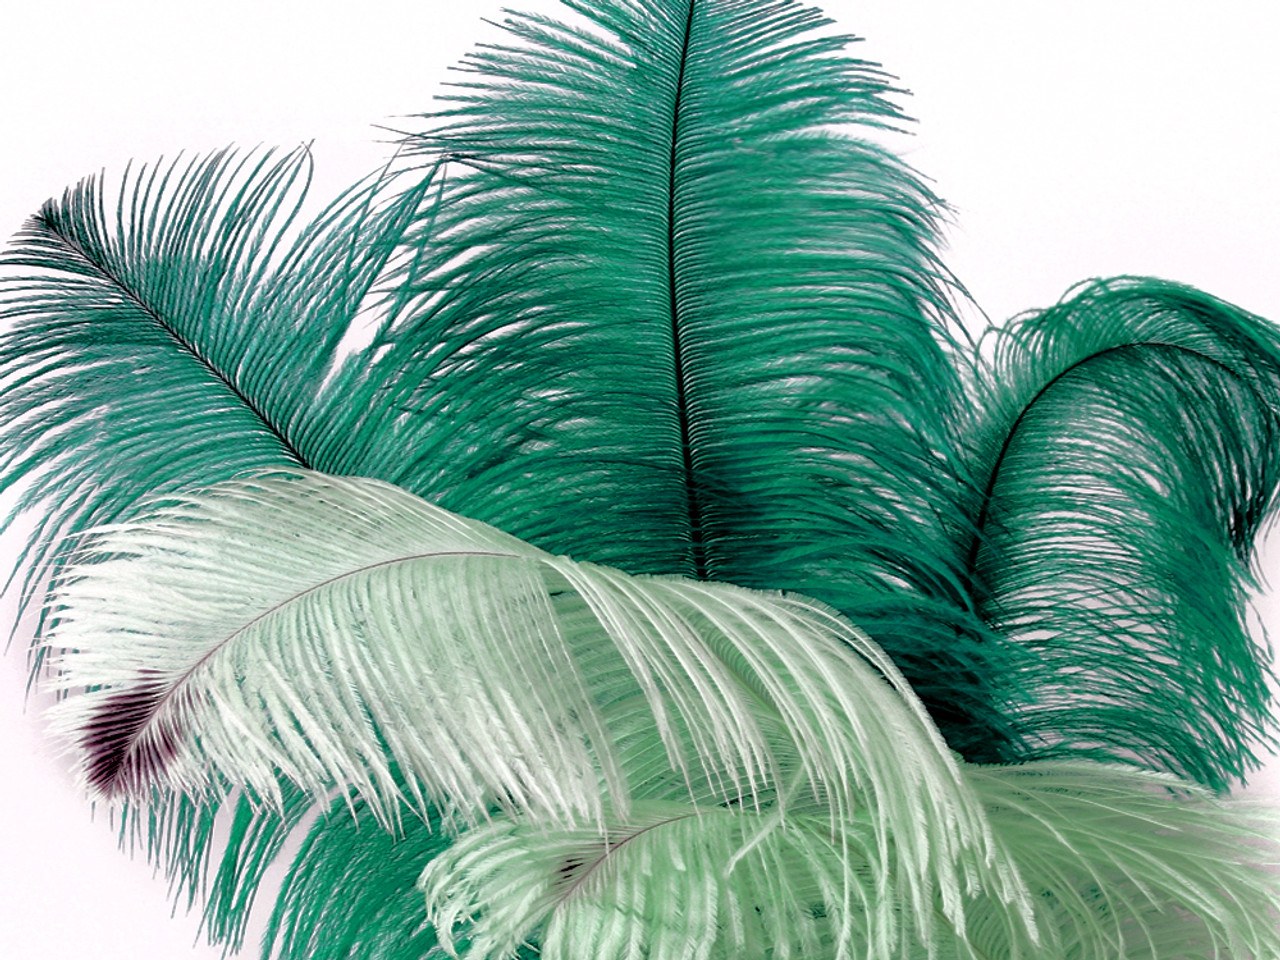 Bulk Emerald Green Goose Pallet Feathers  Buy 6 to 8 Inches Goose Feathers  – Zucker Feather Products, Inc.